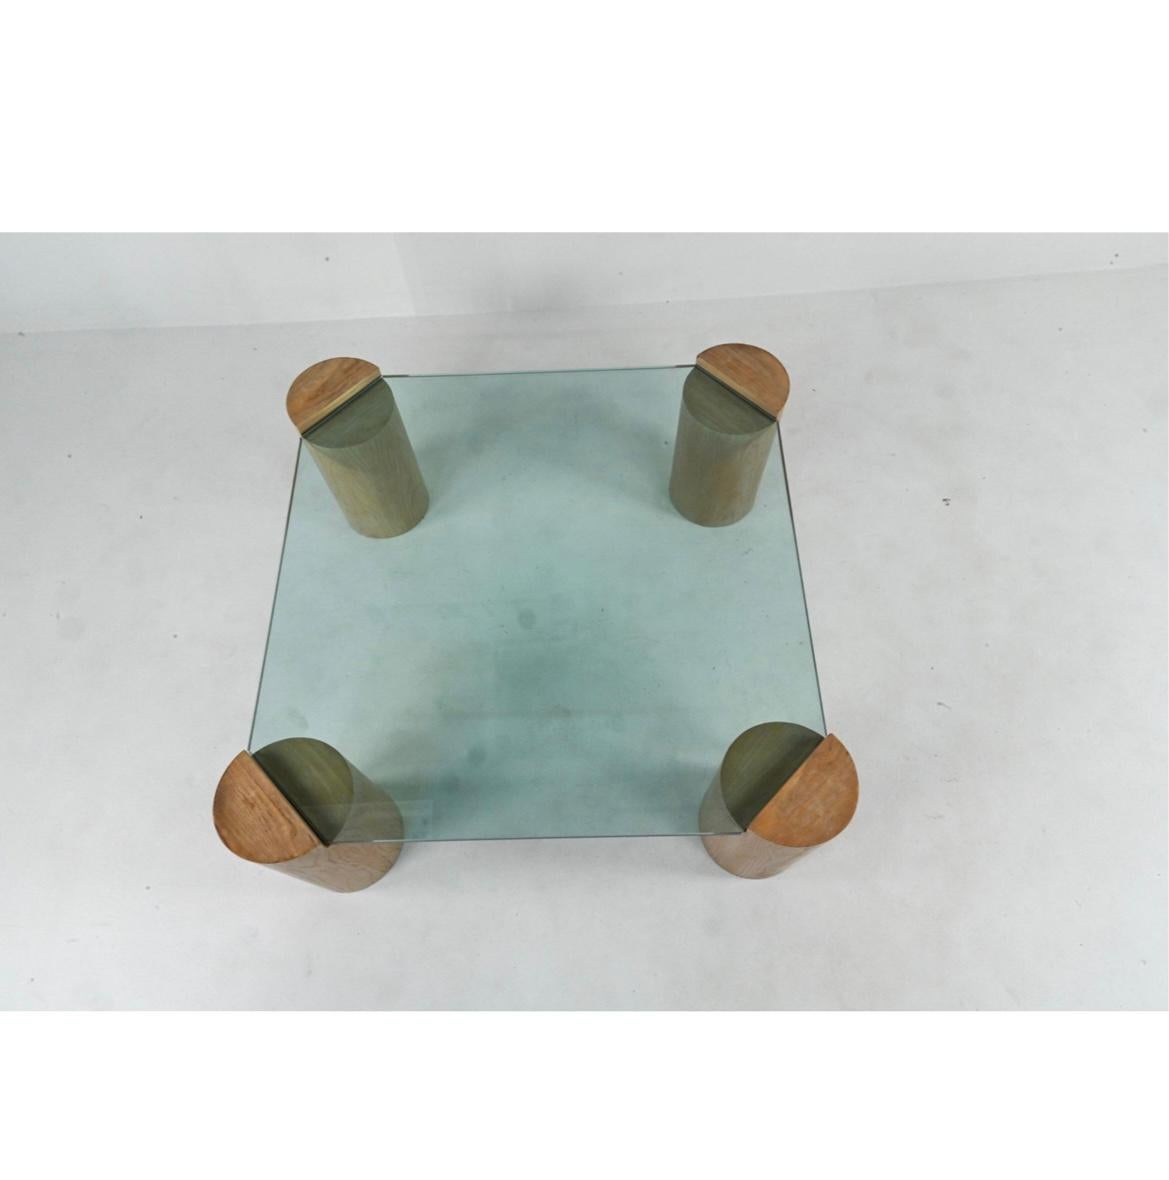 American Mid-Century Modern Wood and Glass Square Coffee Table Karl Springer Style